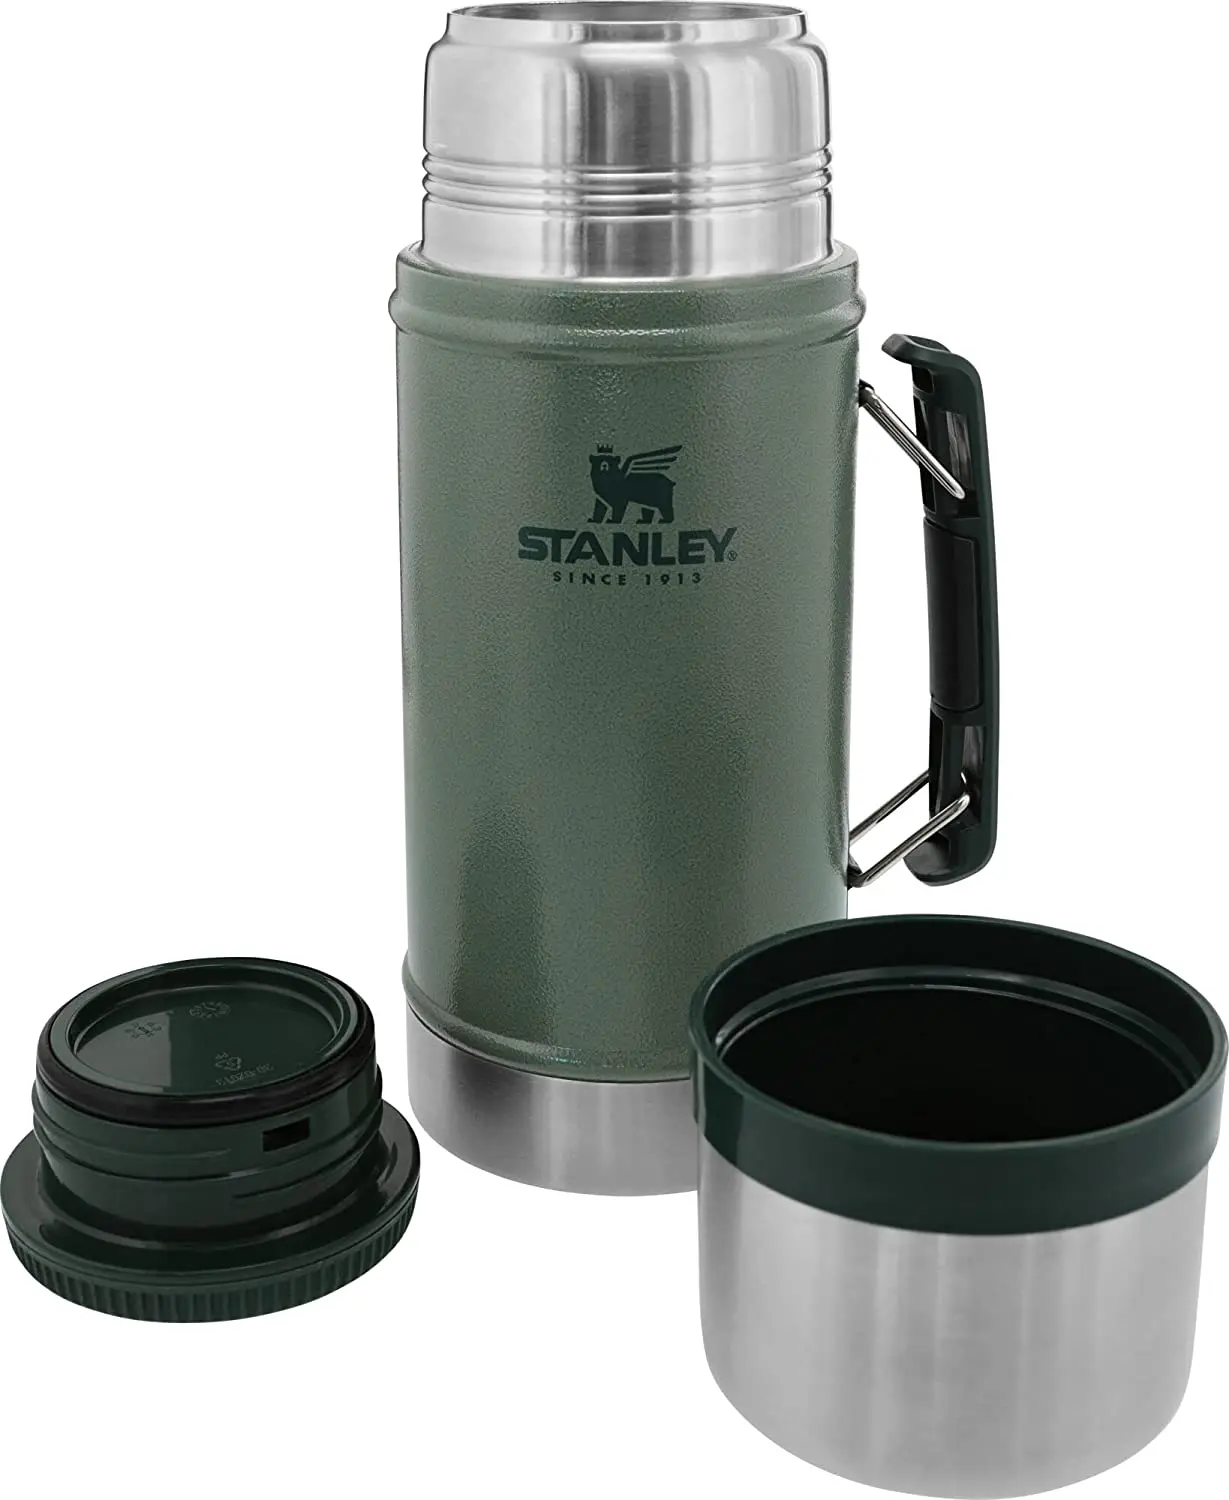 https://ae01.alicdn.com/kf/Uf1cc7b955ac14e8da0ee0b326457aa5em/Stanley-Classic-Vacuum-Food-Thermos-0-94-L-Portable-Vacuum-Flask-Insulated-Tumbler-with-Rope-Thermo.jpg